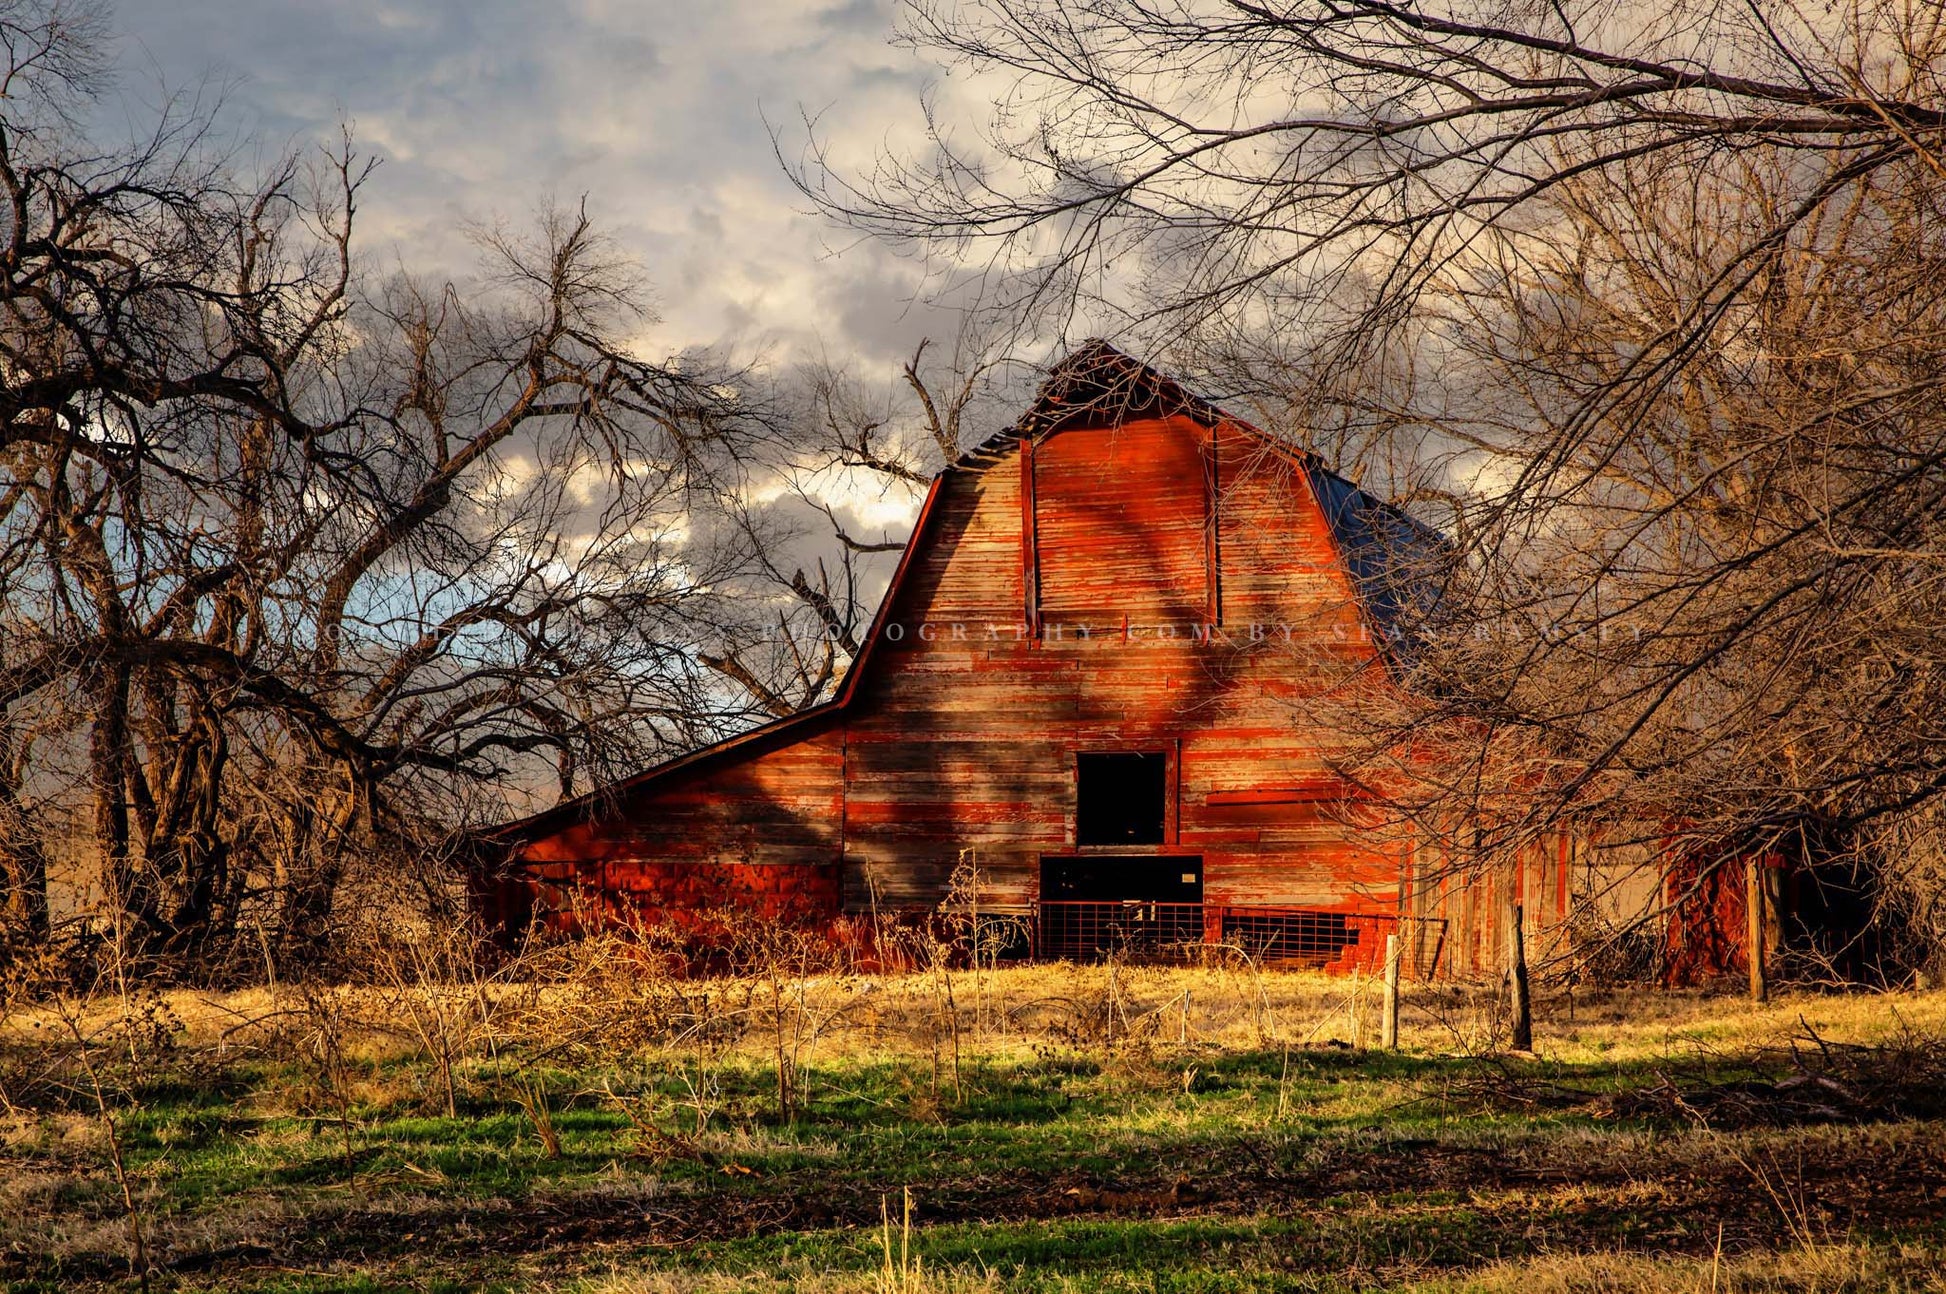 Country photography print of a rustic red barn sitting in the shadows of leafless trees on an autumn day in Oklahoma by Sean Ramsey of Southern Plains Photography.